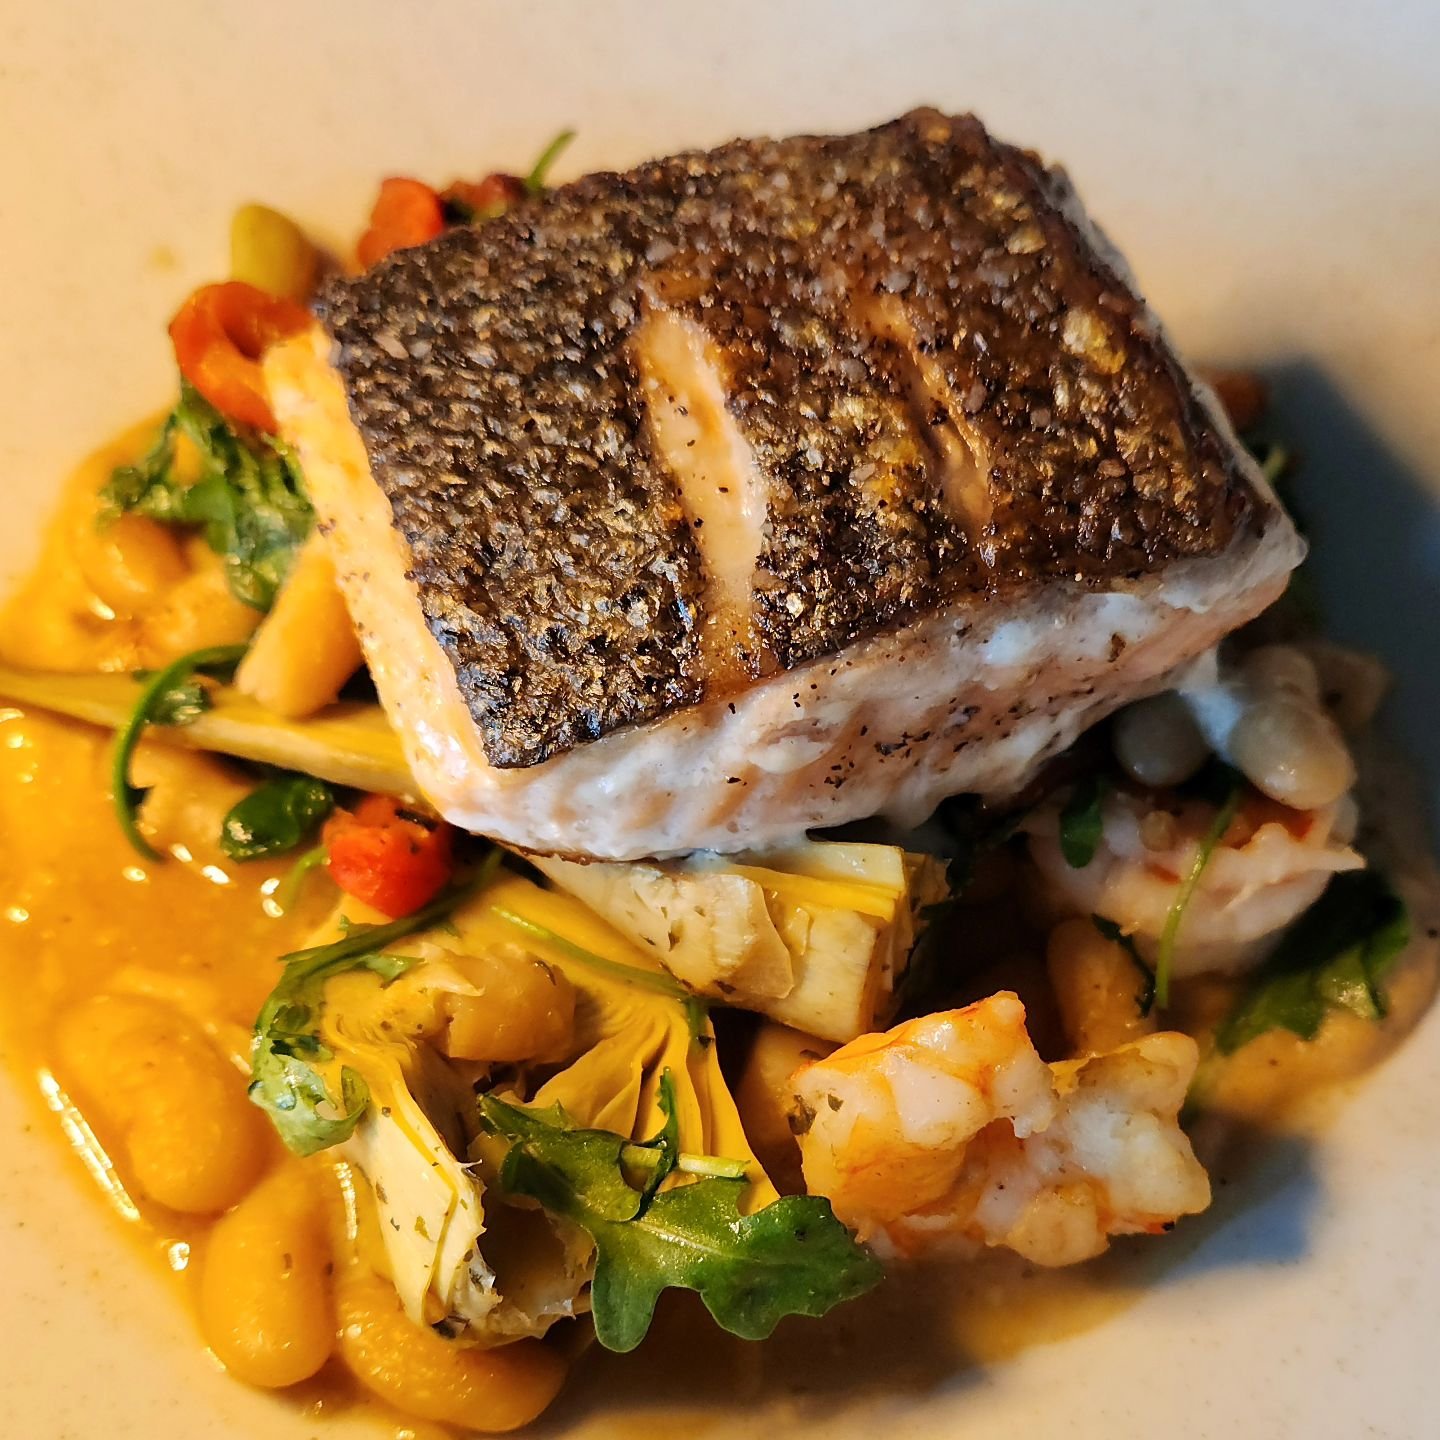 Lots of new spring menu items to try! Seared Faroe Island Salmon with NC shrimp is just one of our new dinner items. Check out all of our updated menus through the link in our bio then join us Tuesday - Sunday to find your new favorite! 
.
.
#seafood